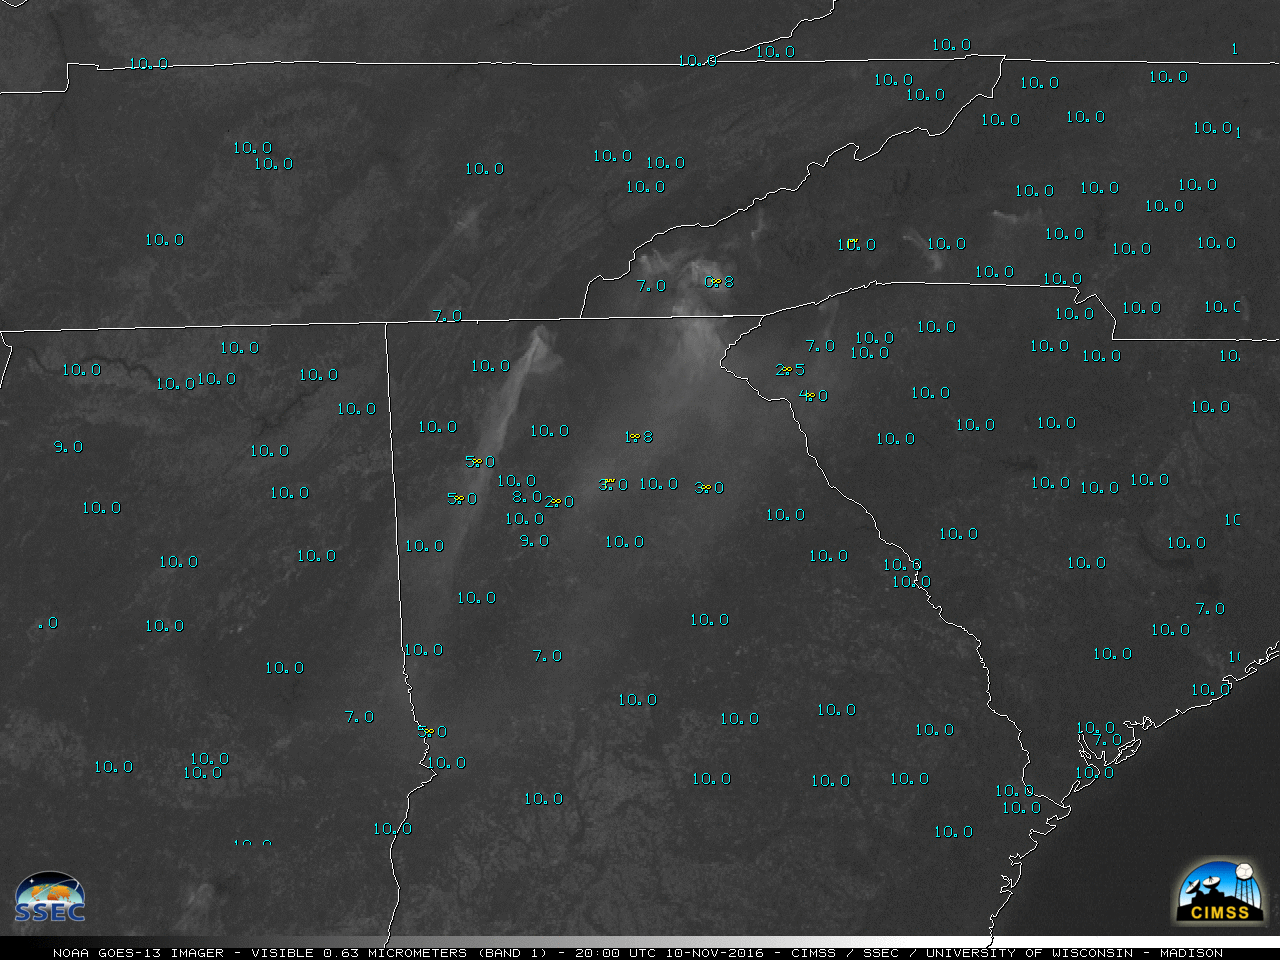 GOES-13 Visible (0.63 µm) images; hourly surface weather symbols are plotted in yellow, with surface visibility (statute miles) plotted in cyan [click to play animation]